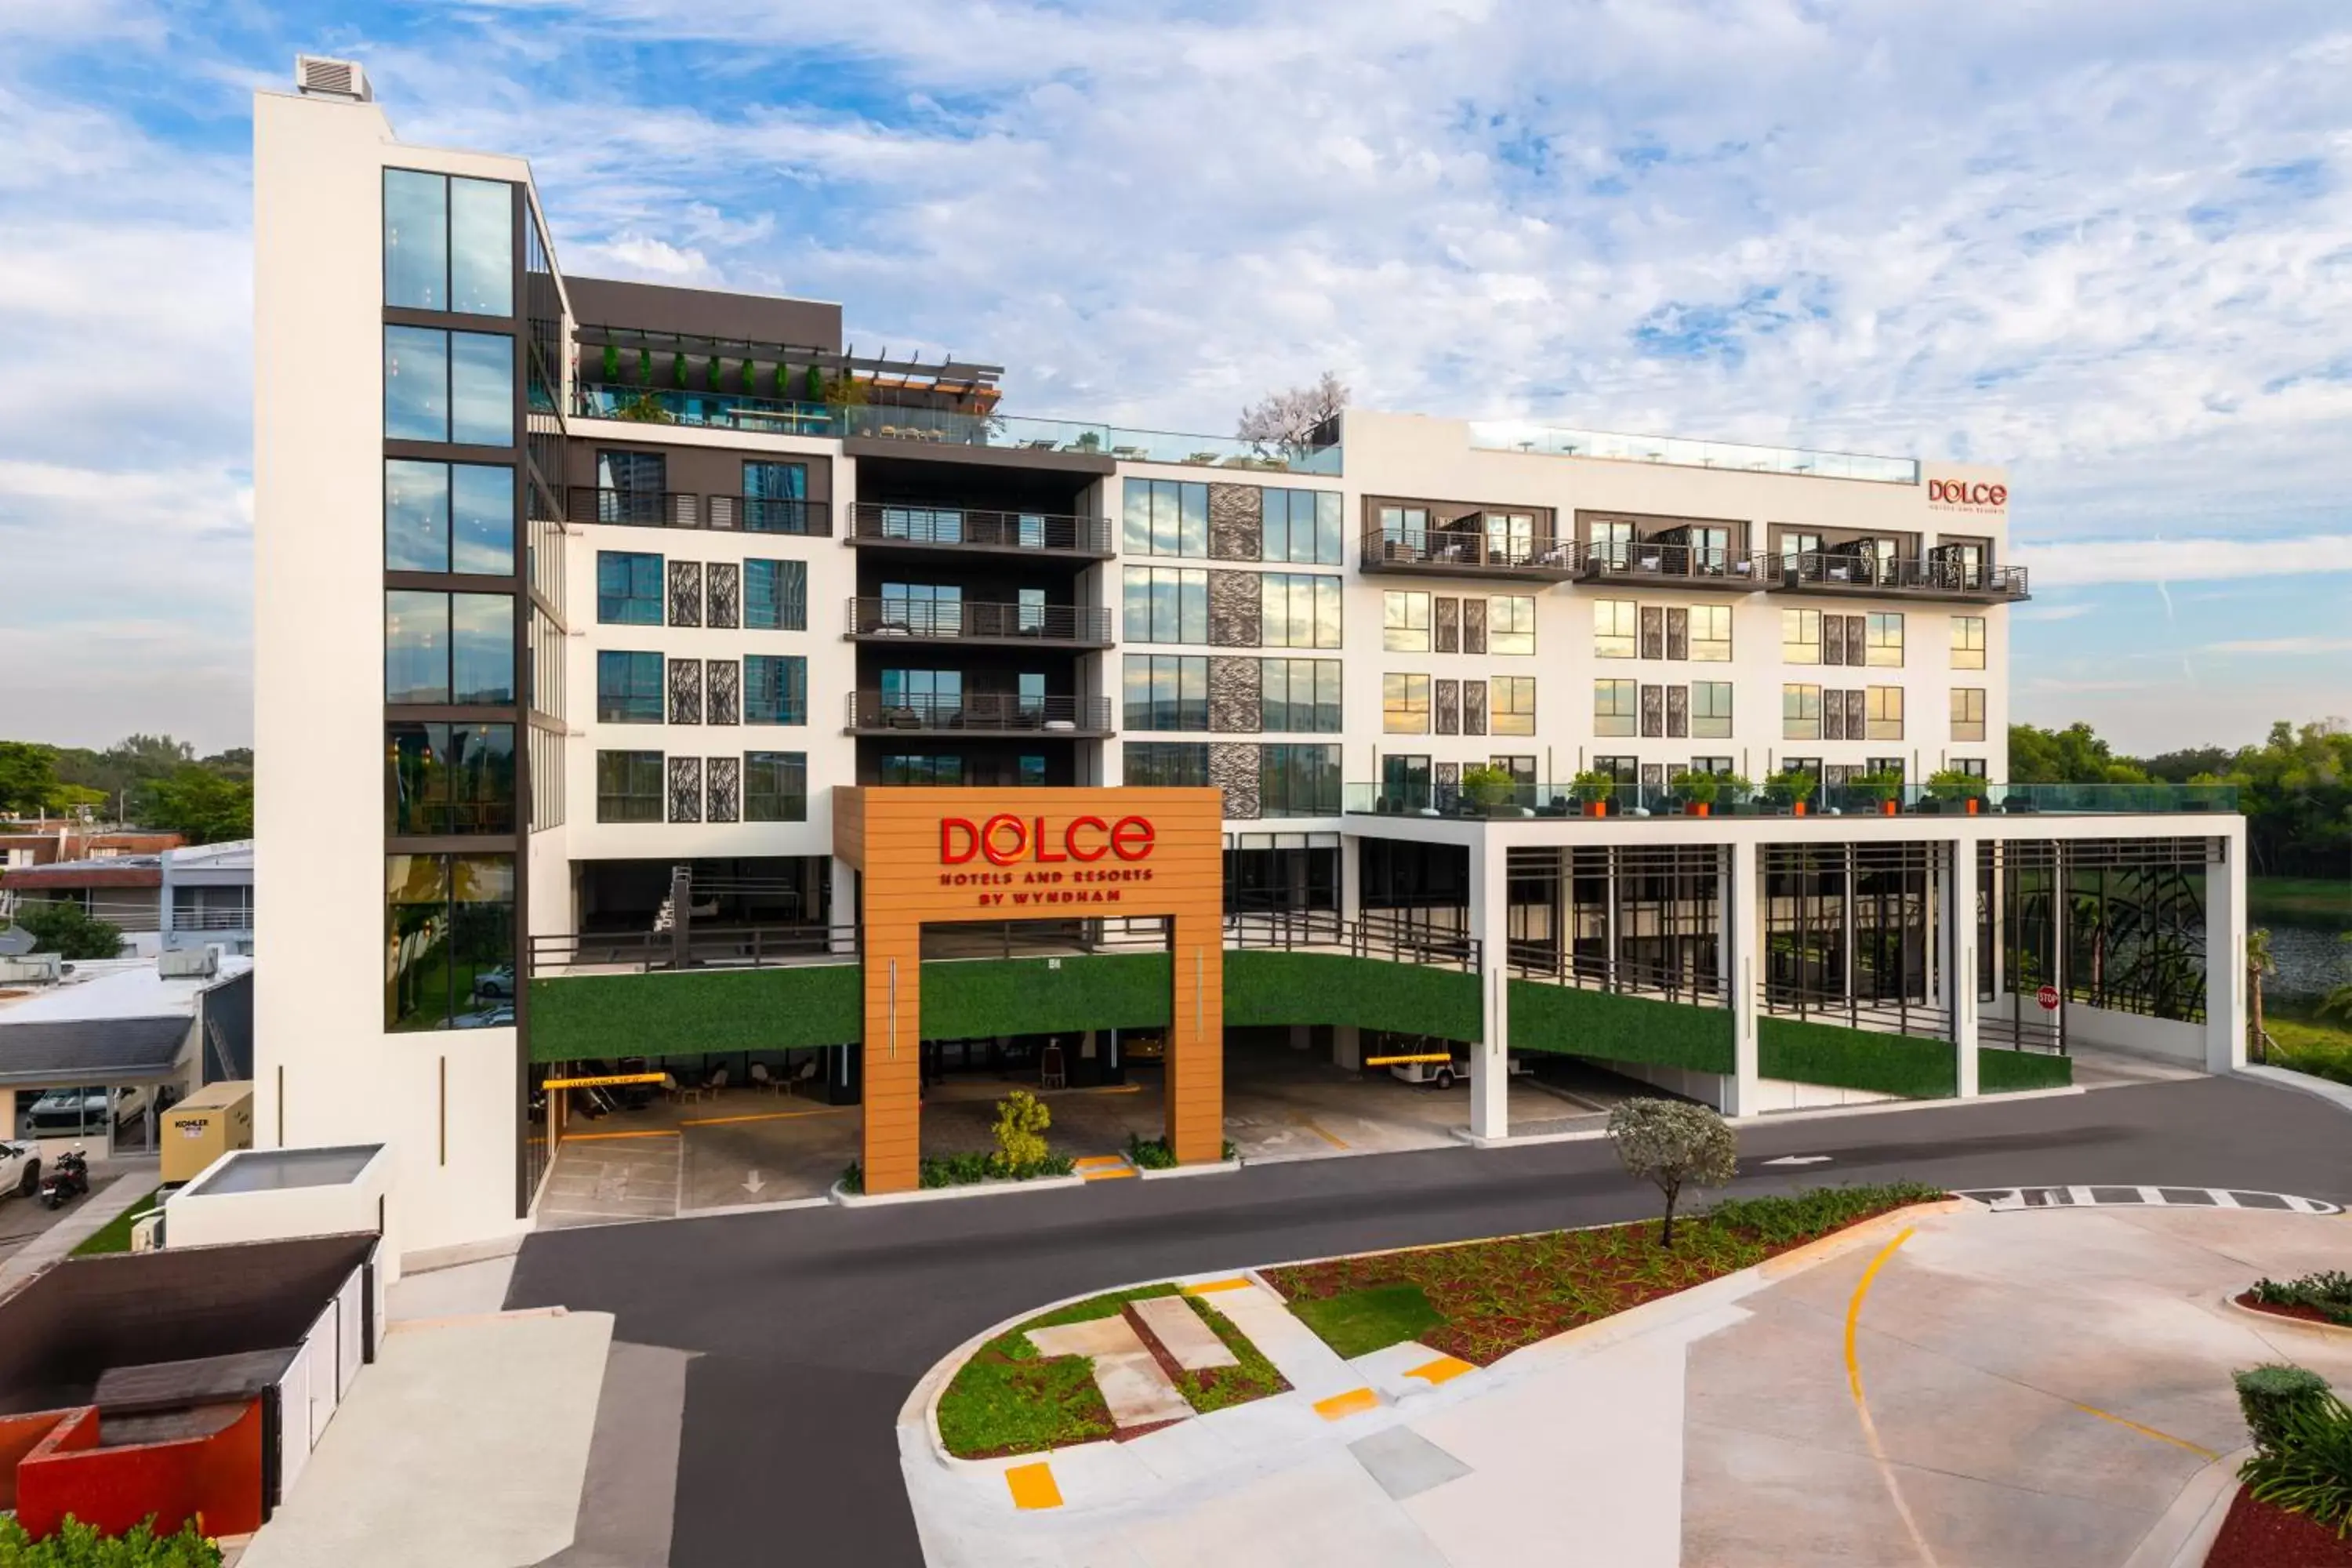 Location, Property Building in Dolce by Wyndham Hollywood